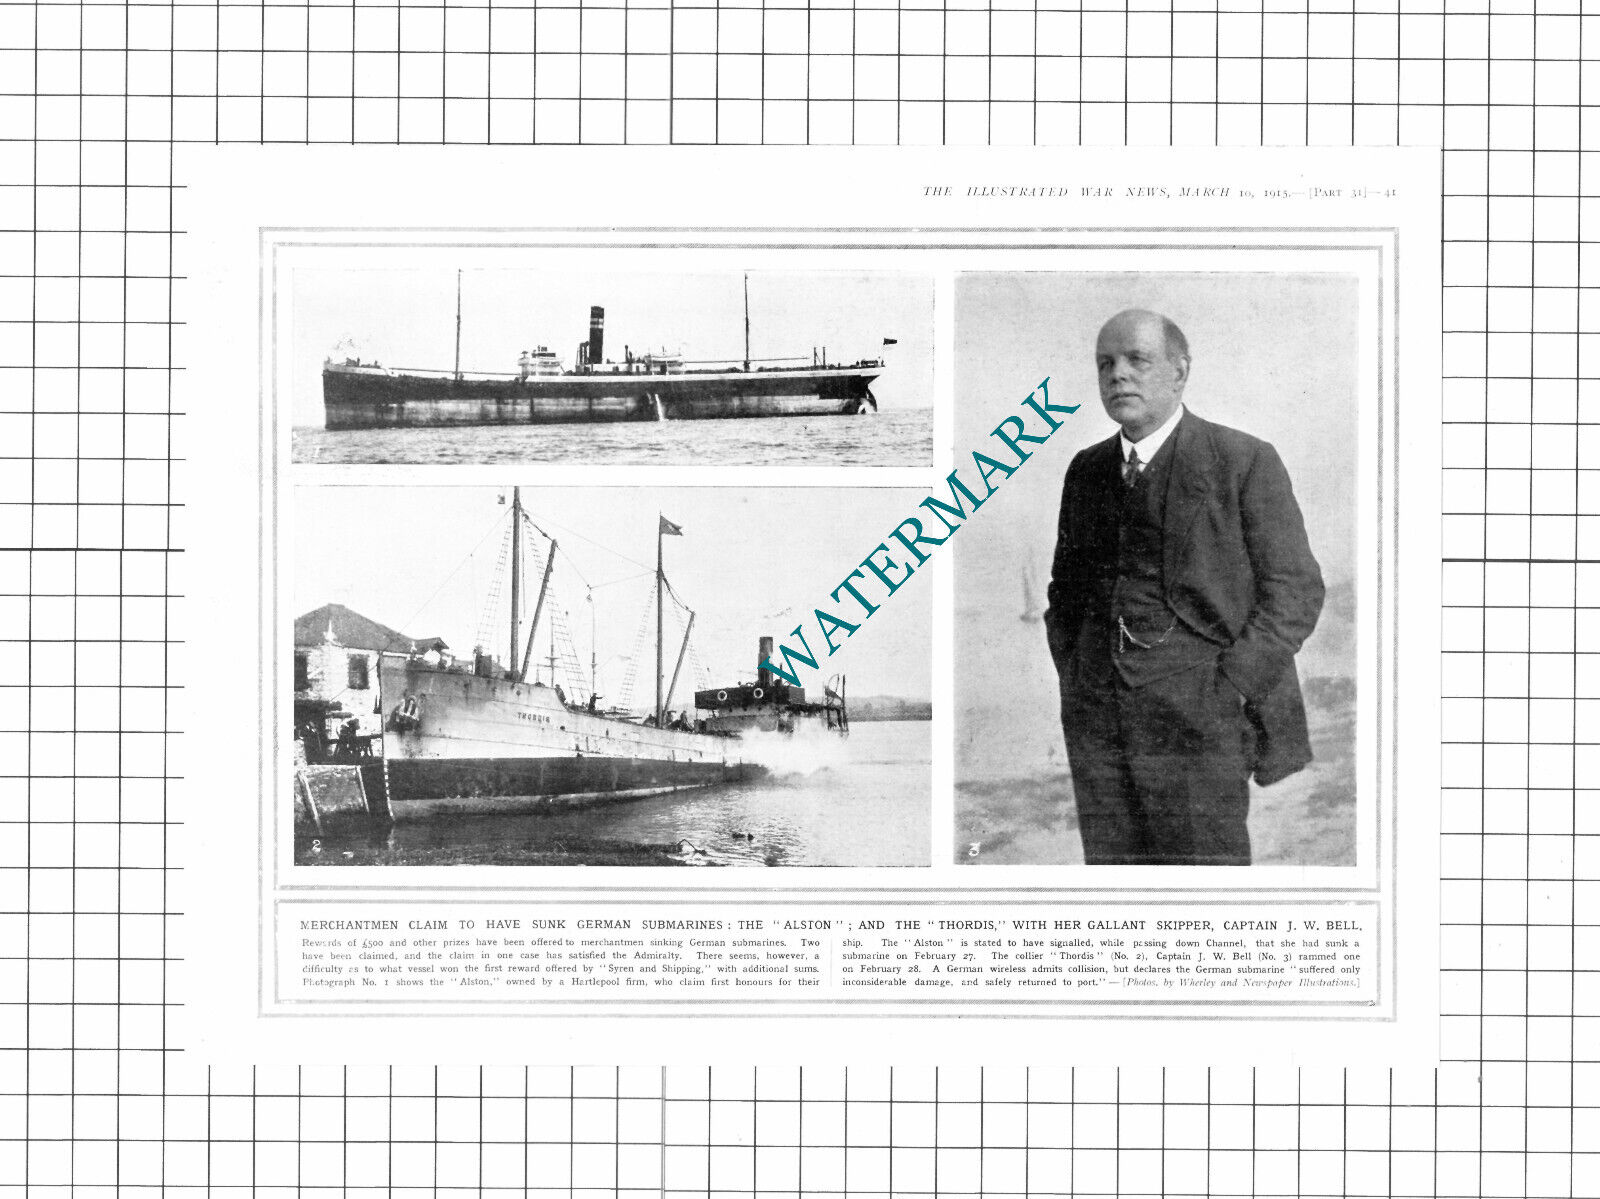 Captain J W Bell Collier Ship Thordis Great War WW1  - 1915 Clipping / Print